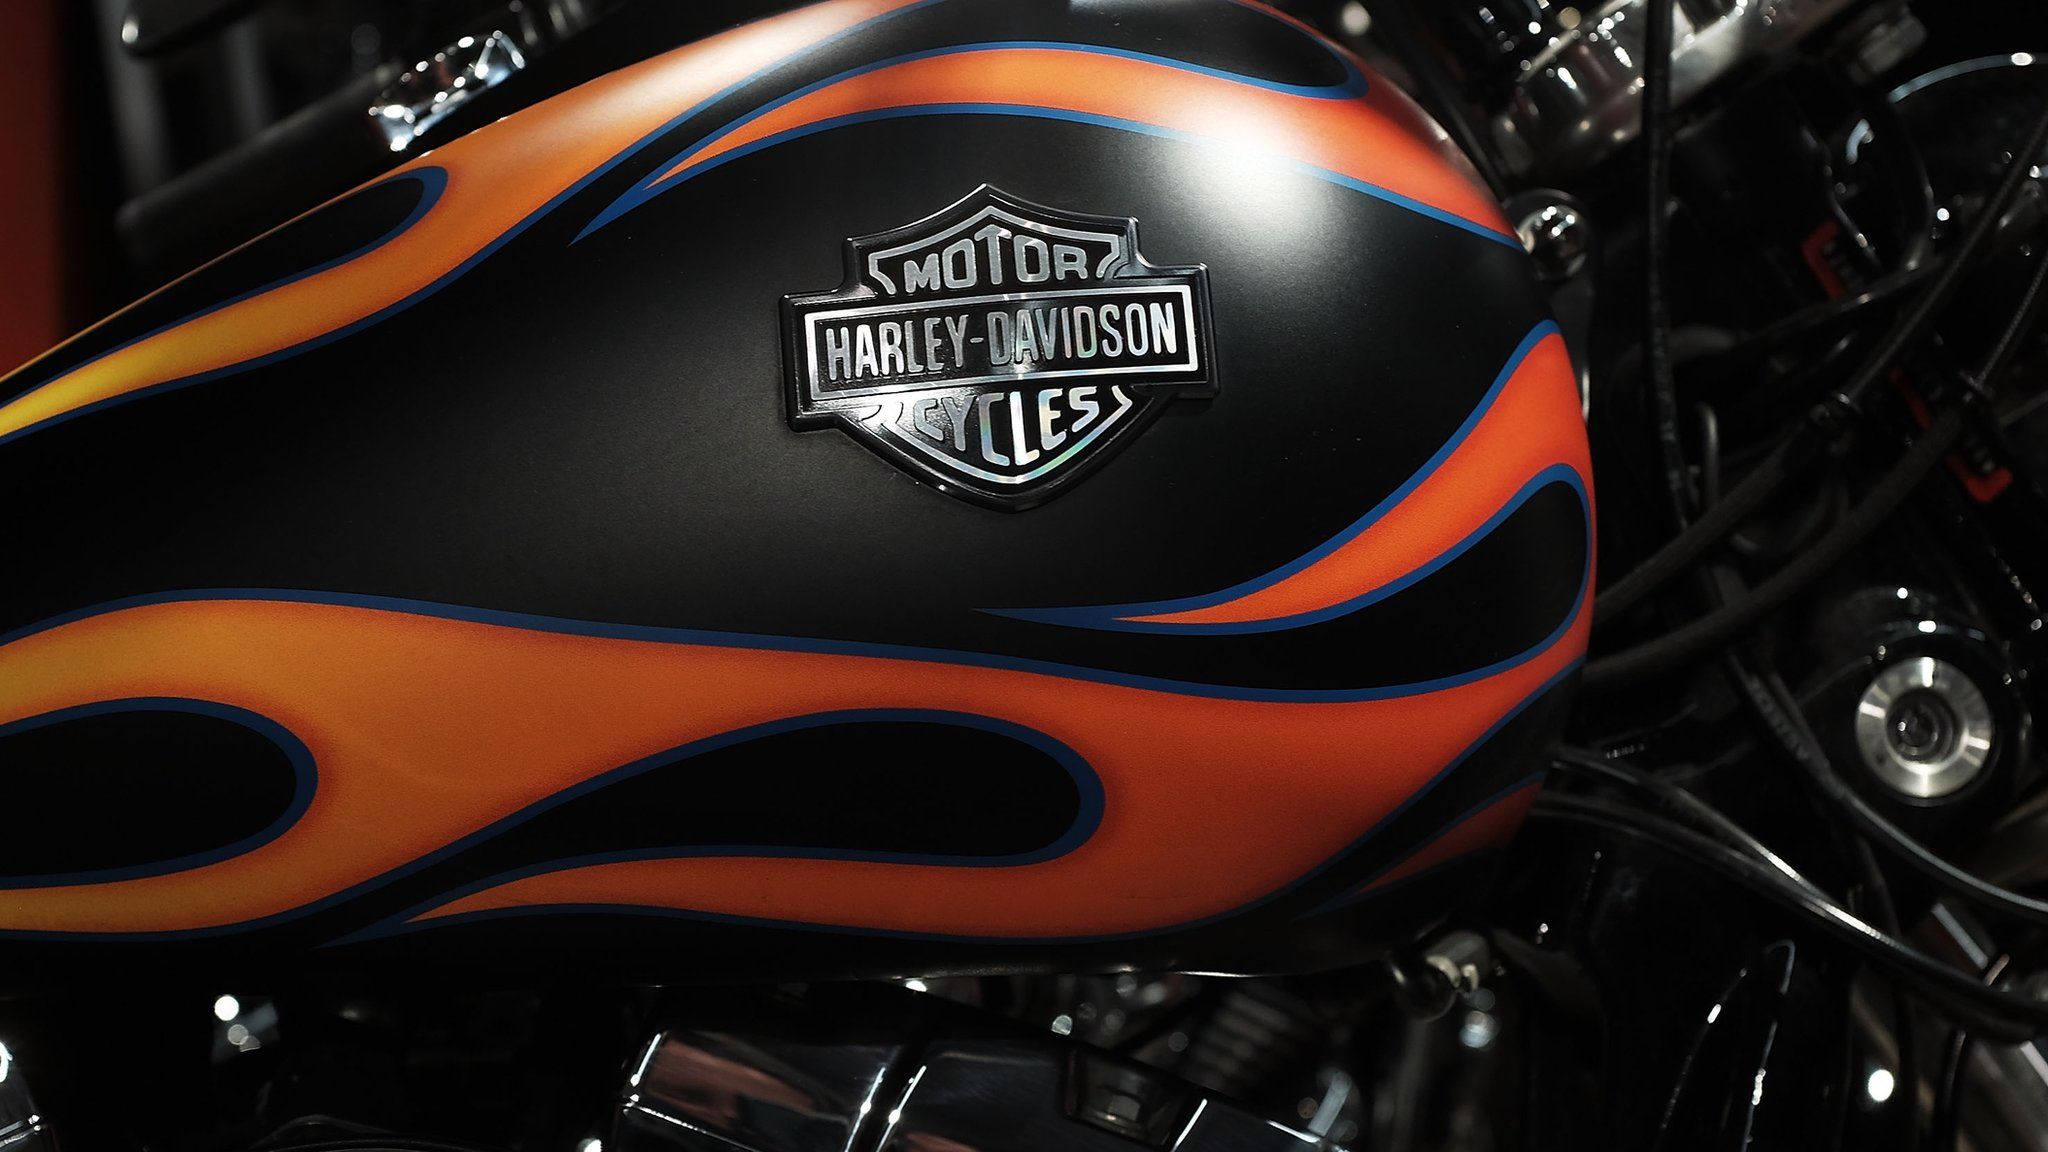 Harley Davidson motorcycles are displayed in New York City